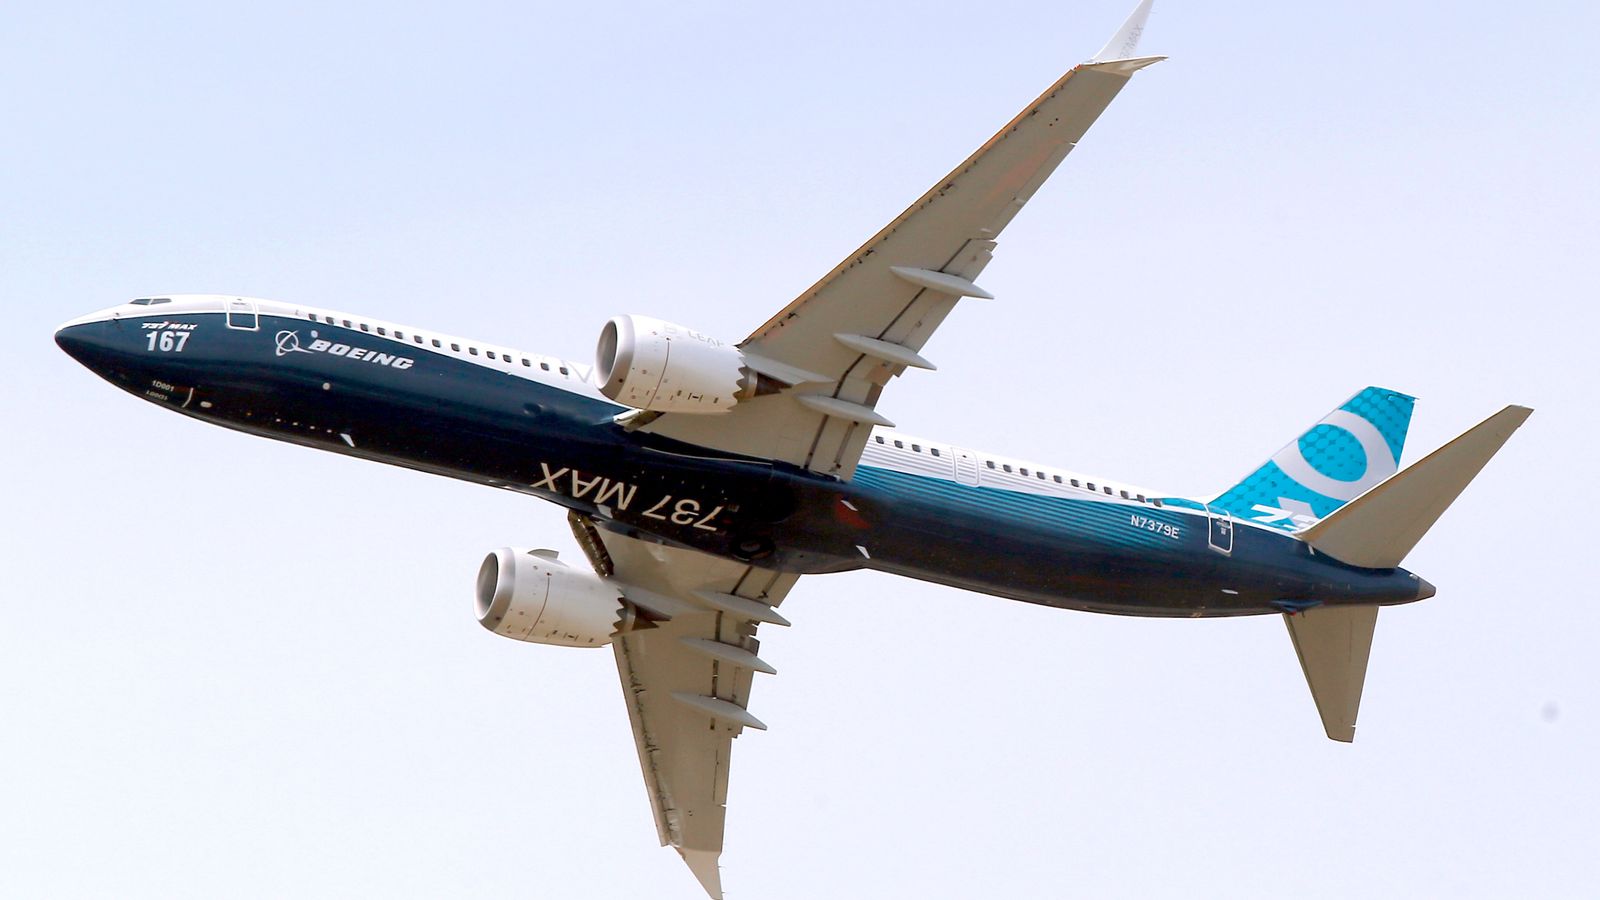 Alaska Airlines chief says checks on Boeing 737 MAX 9 planes found 'many' loose bolts